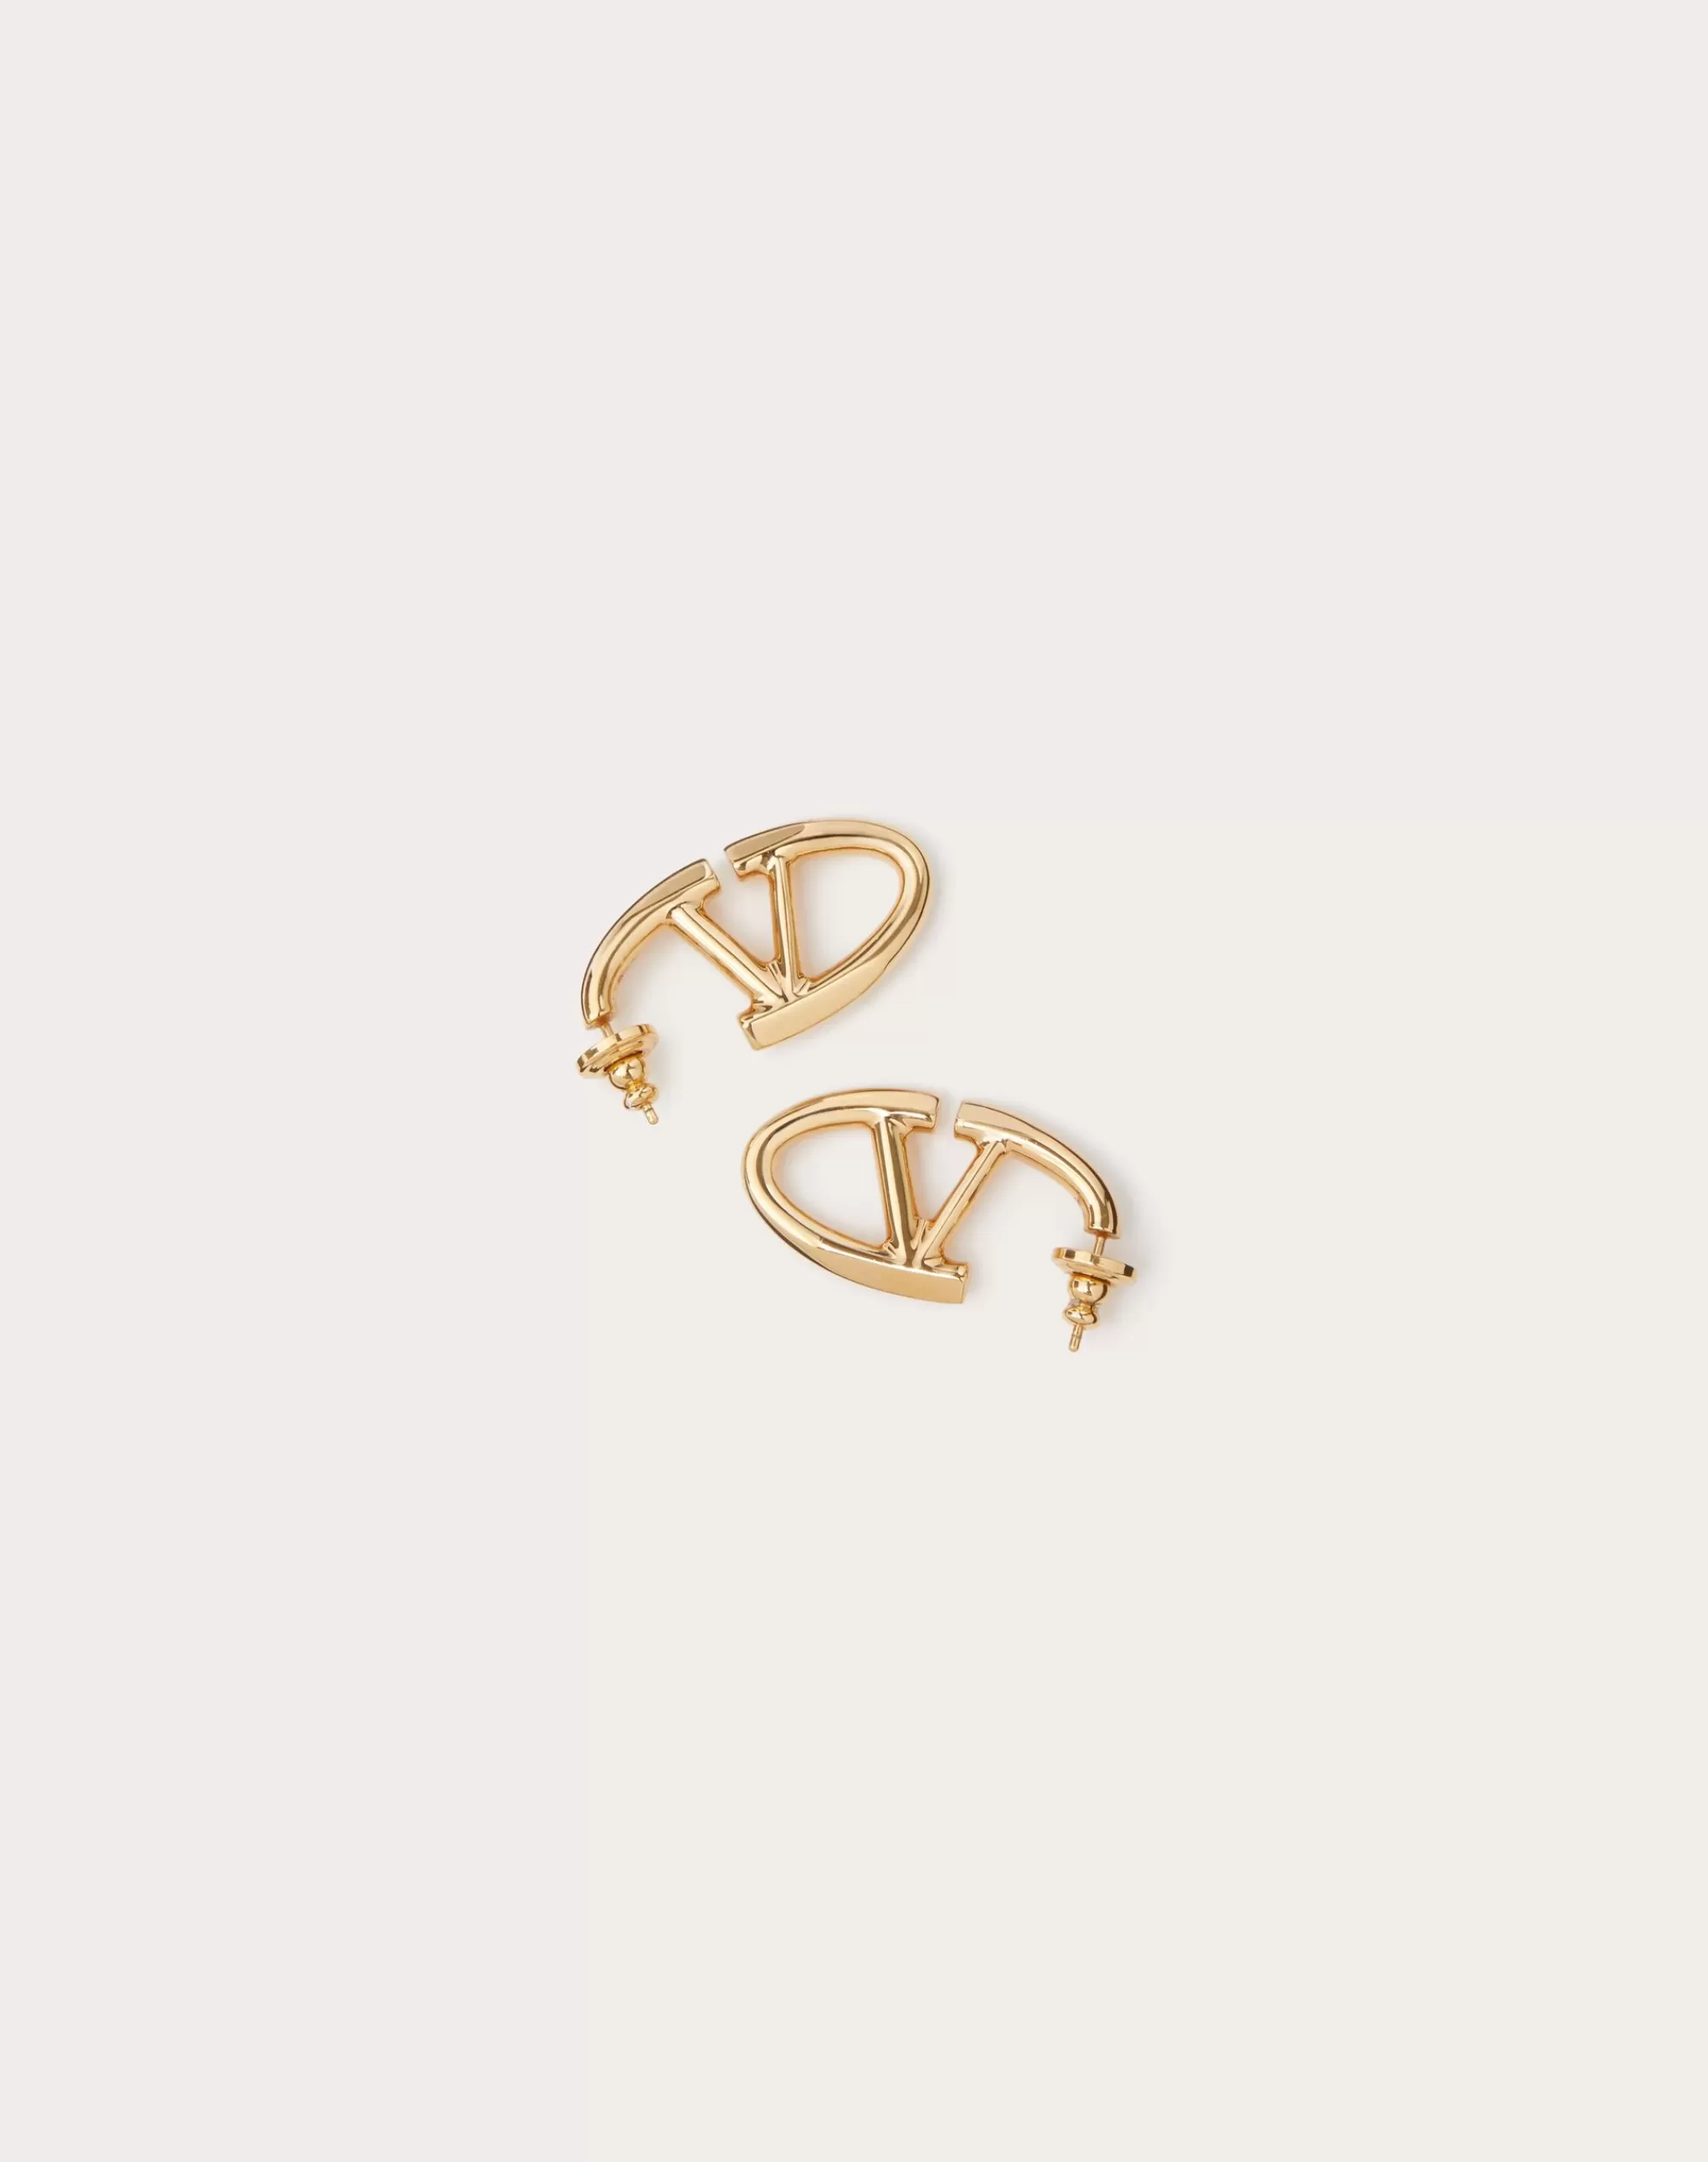 Valentino VLOGO THE BOLD EDITION METAL EARRINGS Gold Shop